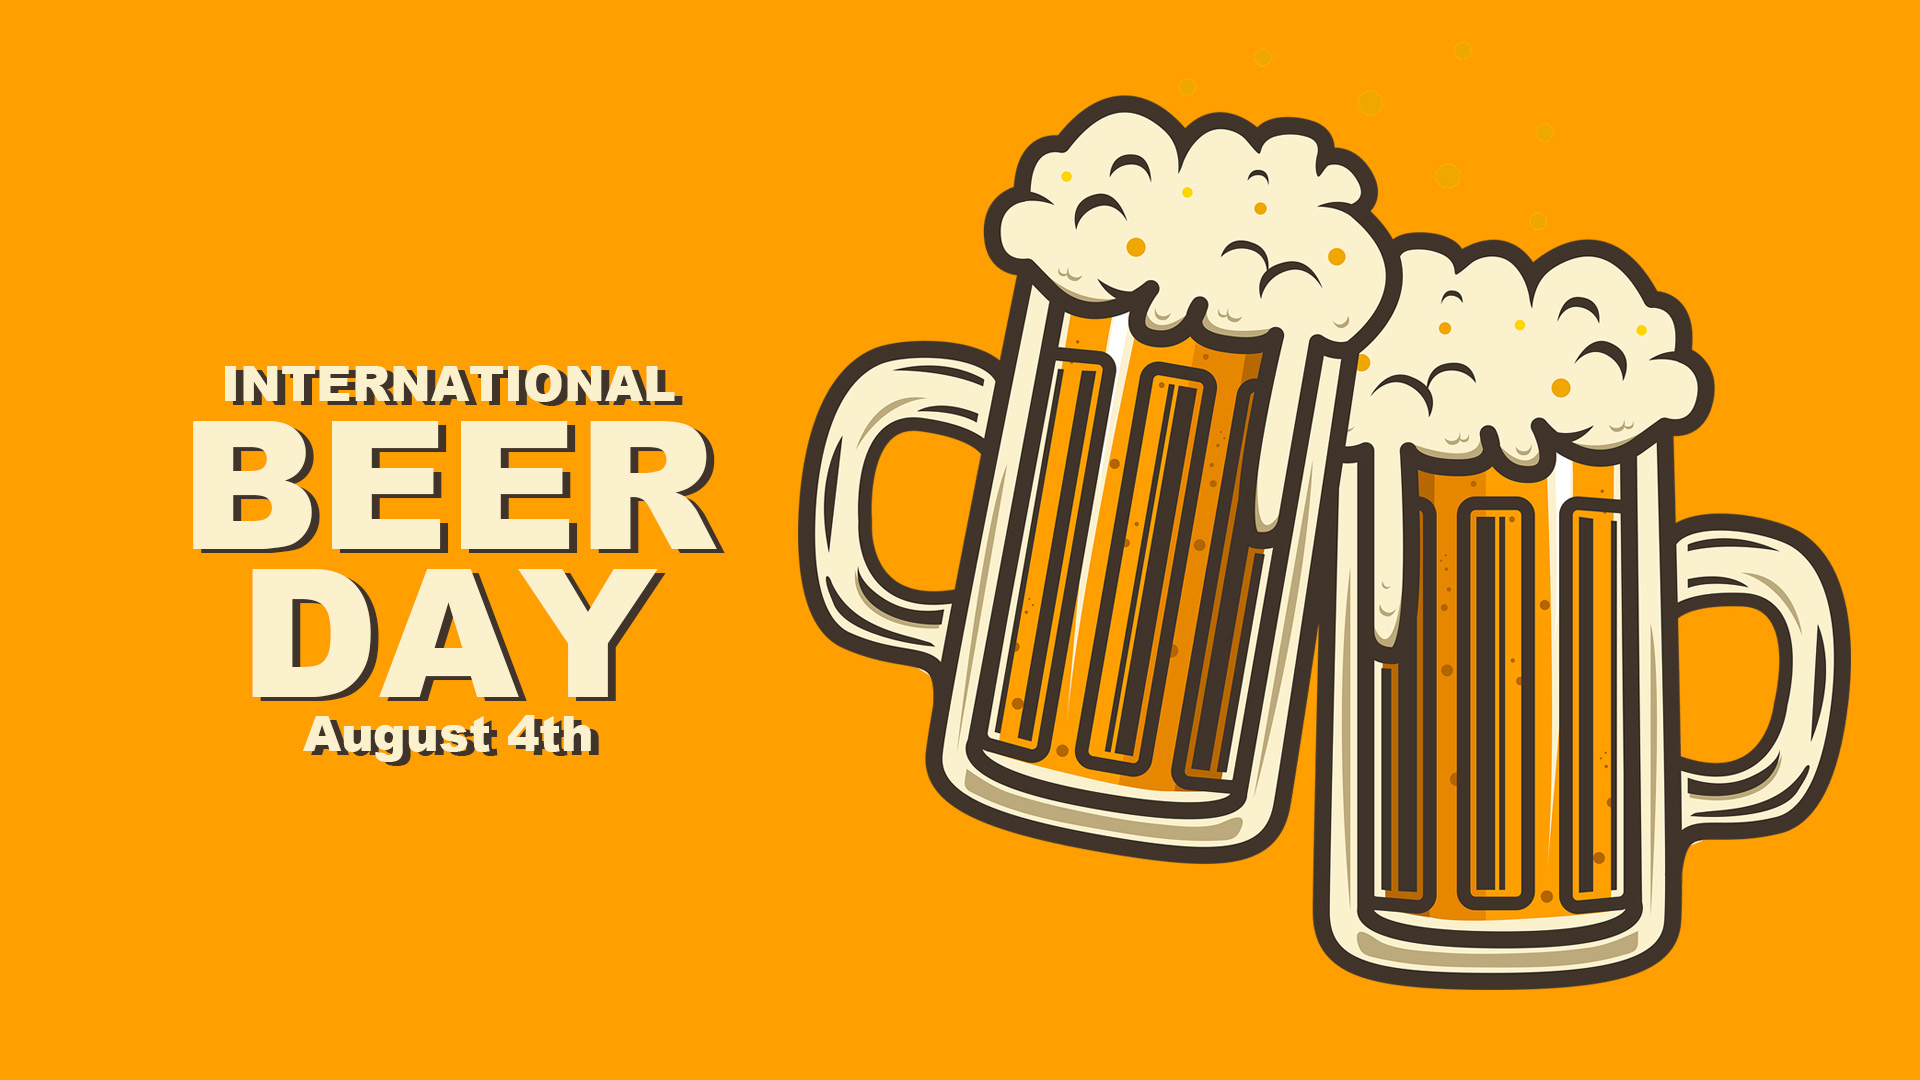 Image is of 2 illustrated beer mugs cheersing. International Beer Day August 4th is written on the left side of the screen in a tan font with a dark brown dropshadow replicating the colors in the illustrated beer mug!